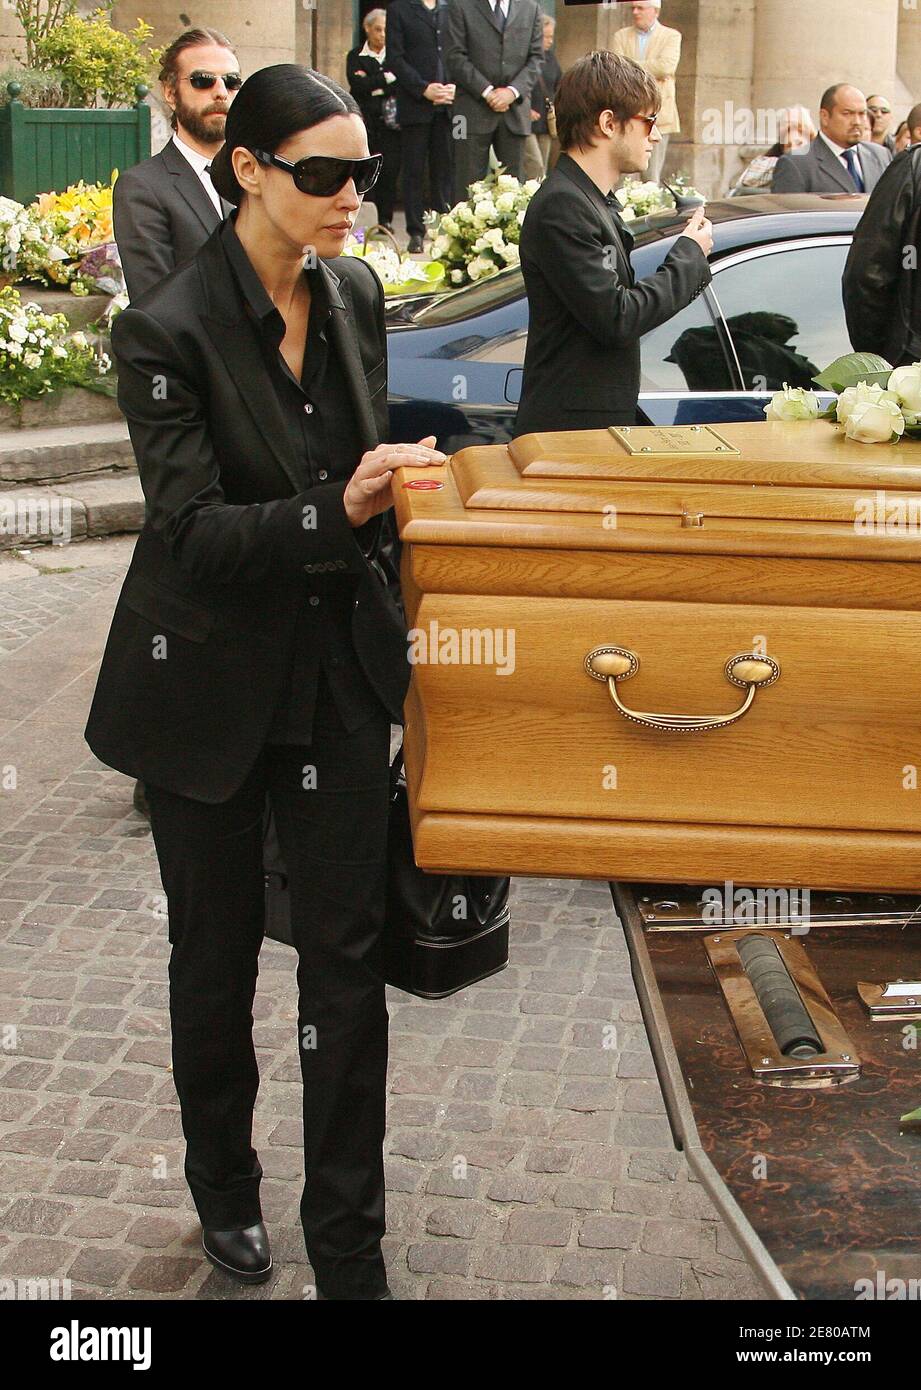 Monica Bellucci during the funeral service for French actor Jean-Pierre  Cassel at Saint-Eustache church in Paris, France on April 26, 2007. Cassel  died of cancer at 74 last Thursday. Photo by Mousse-Nebinger/ABACAPRESS.COM